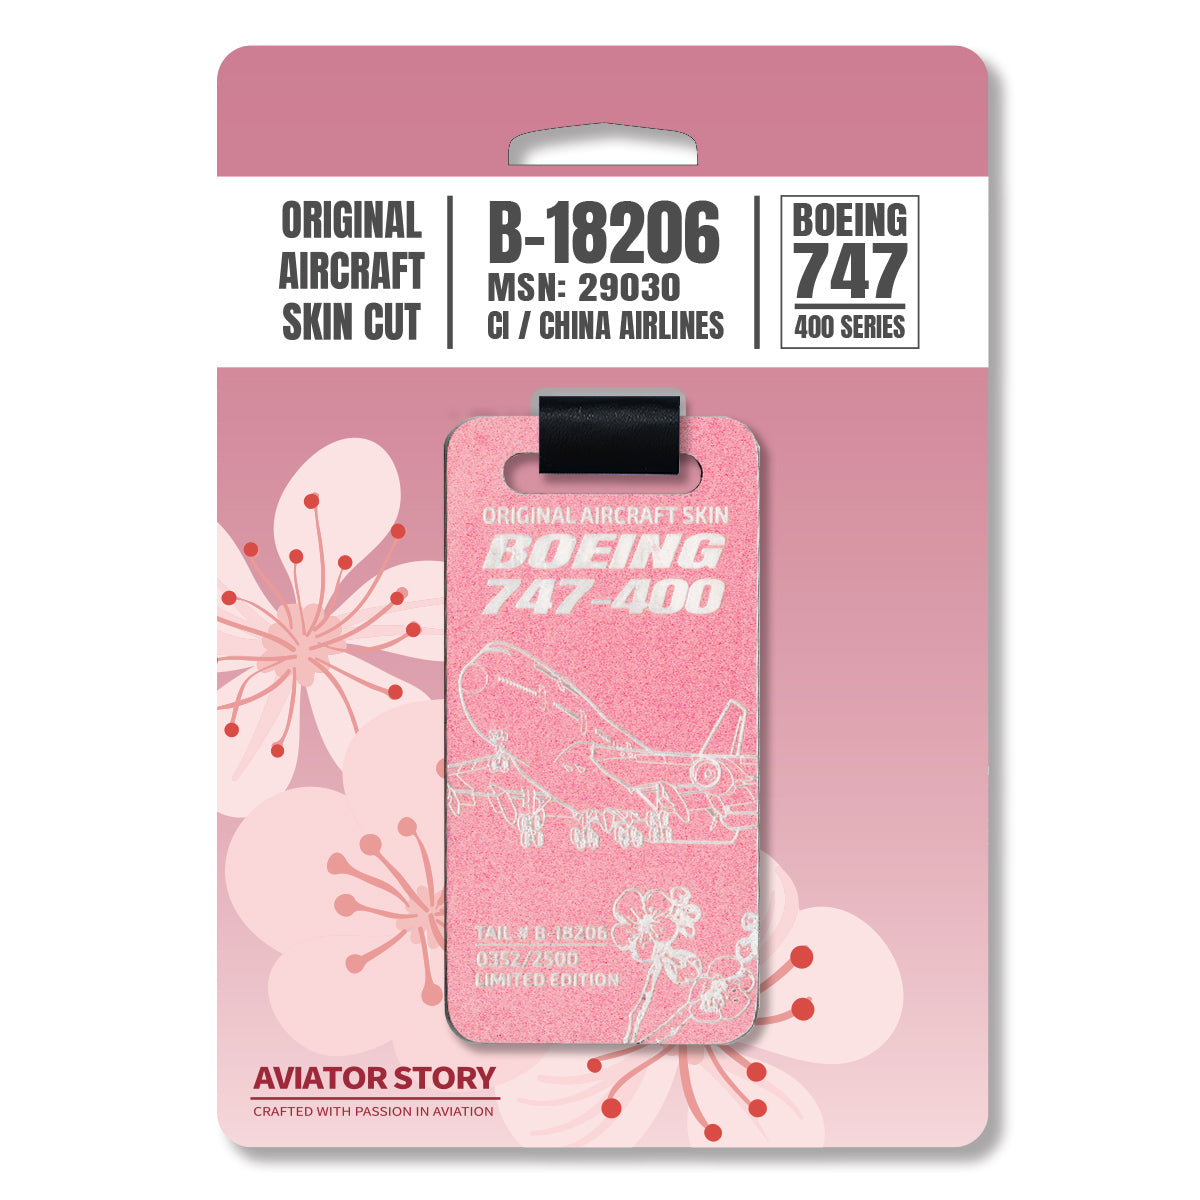 China Airlines Boeing 747-400 plane skin tag aviation  tag plane tag. gift for pilot and crew. Pink original aircraft skin tag.